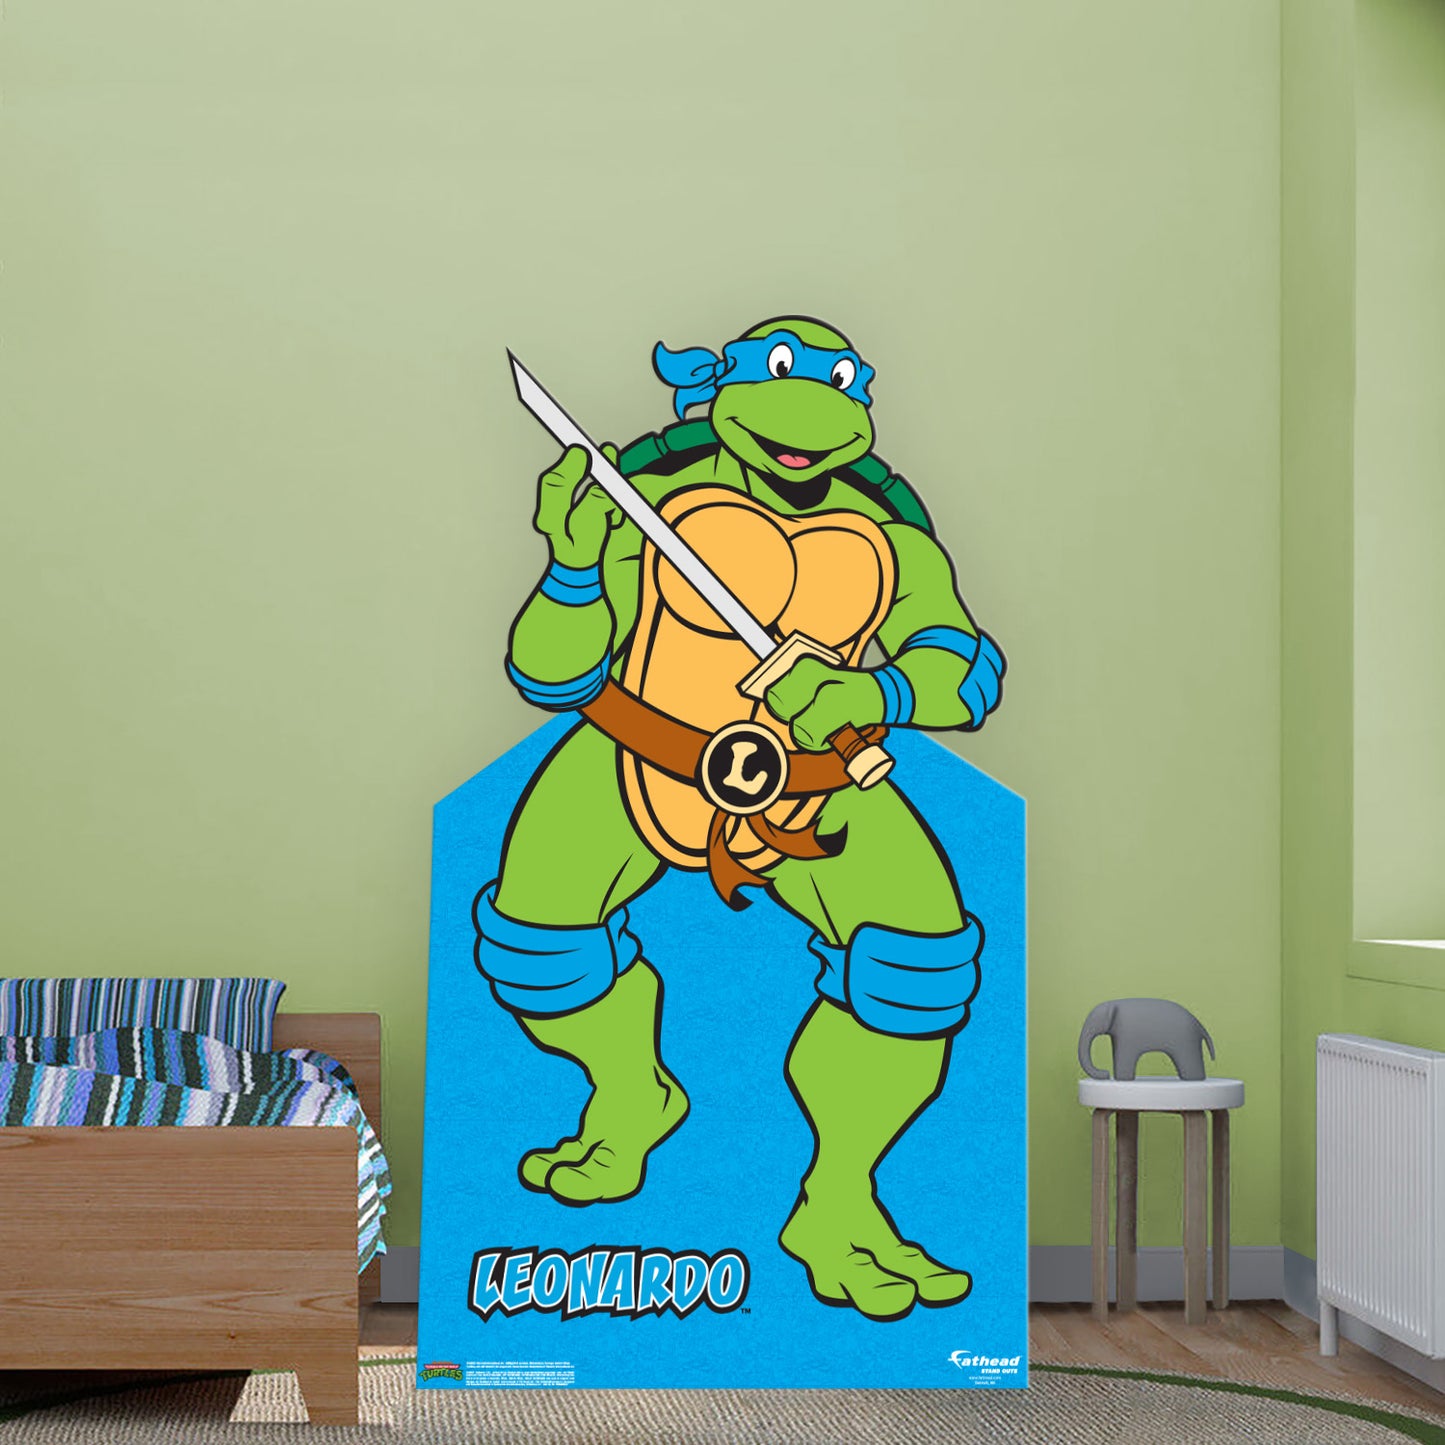 Teenage Mutant Ninja Turtles: Leonardo Life-Size   Foam Core Cutout  - Officially Licensed Nickelodeon    Stand Out